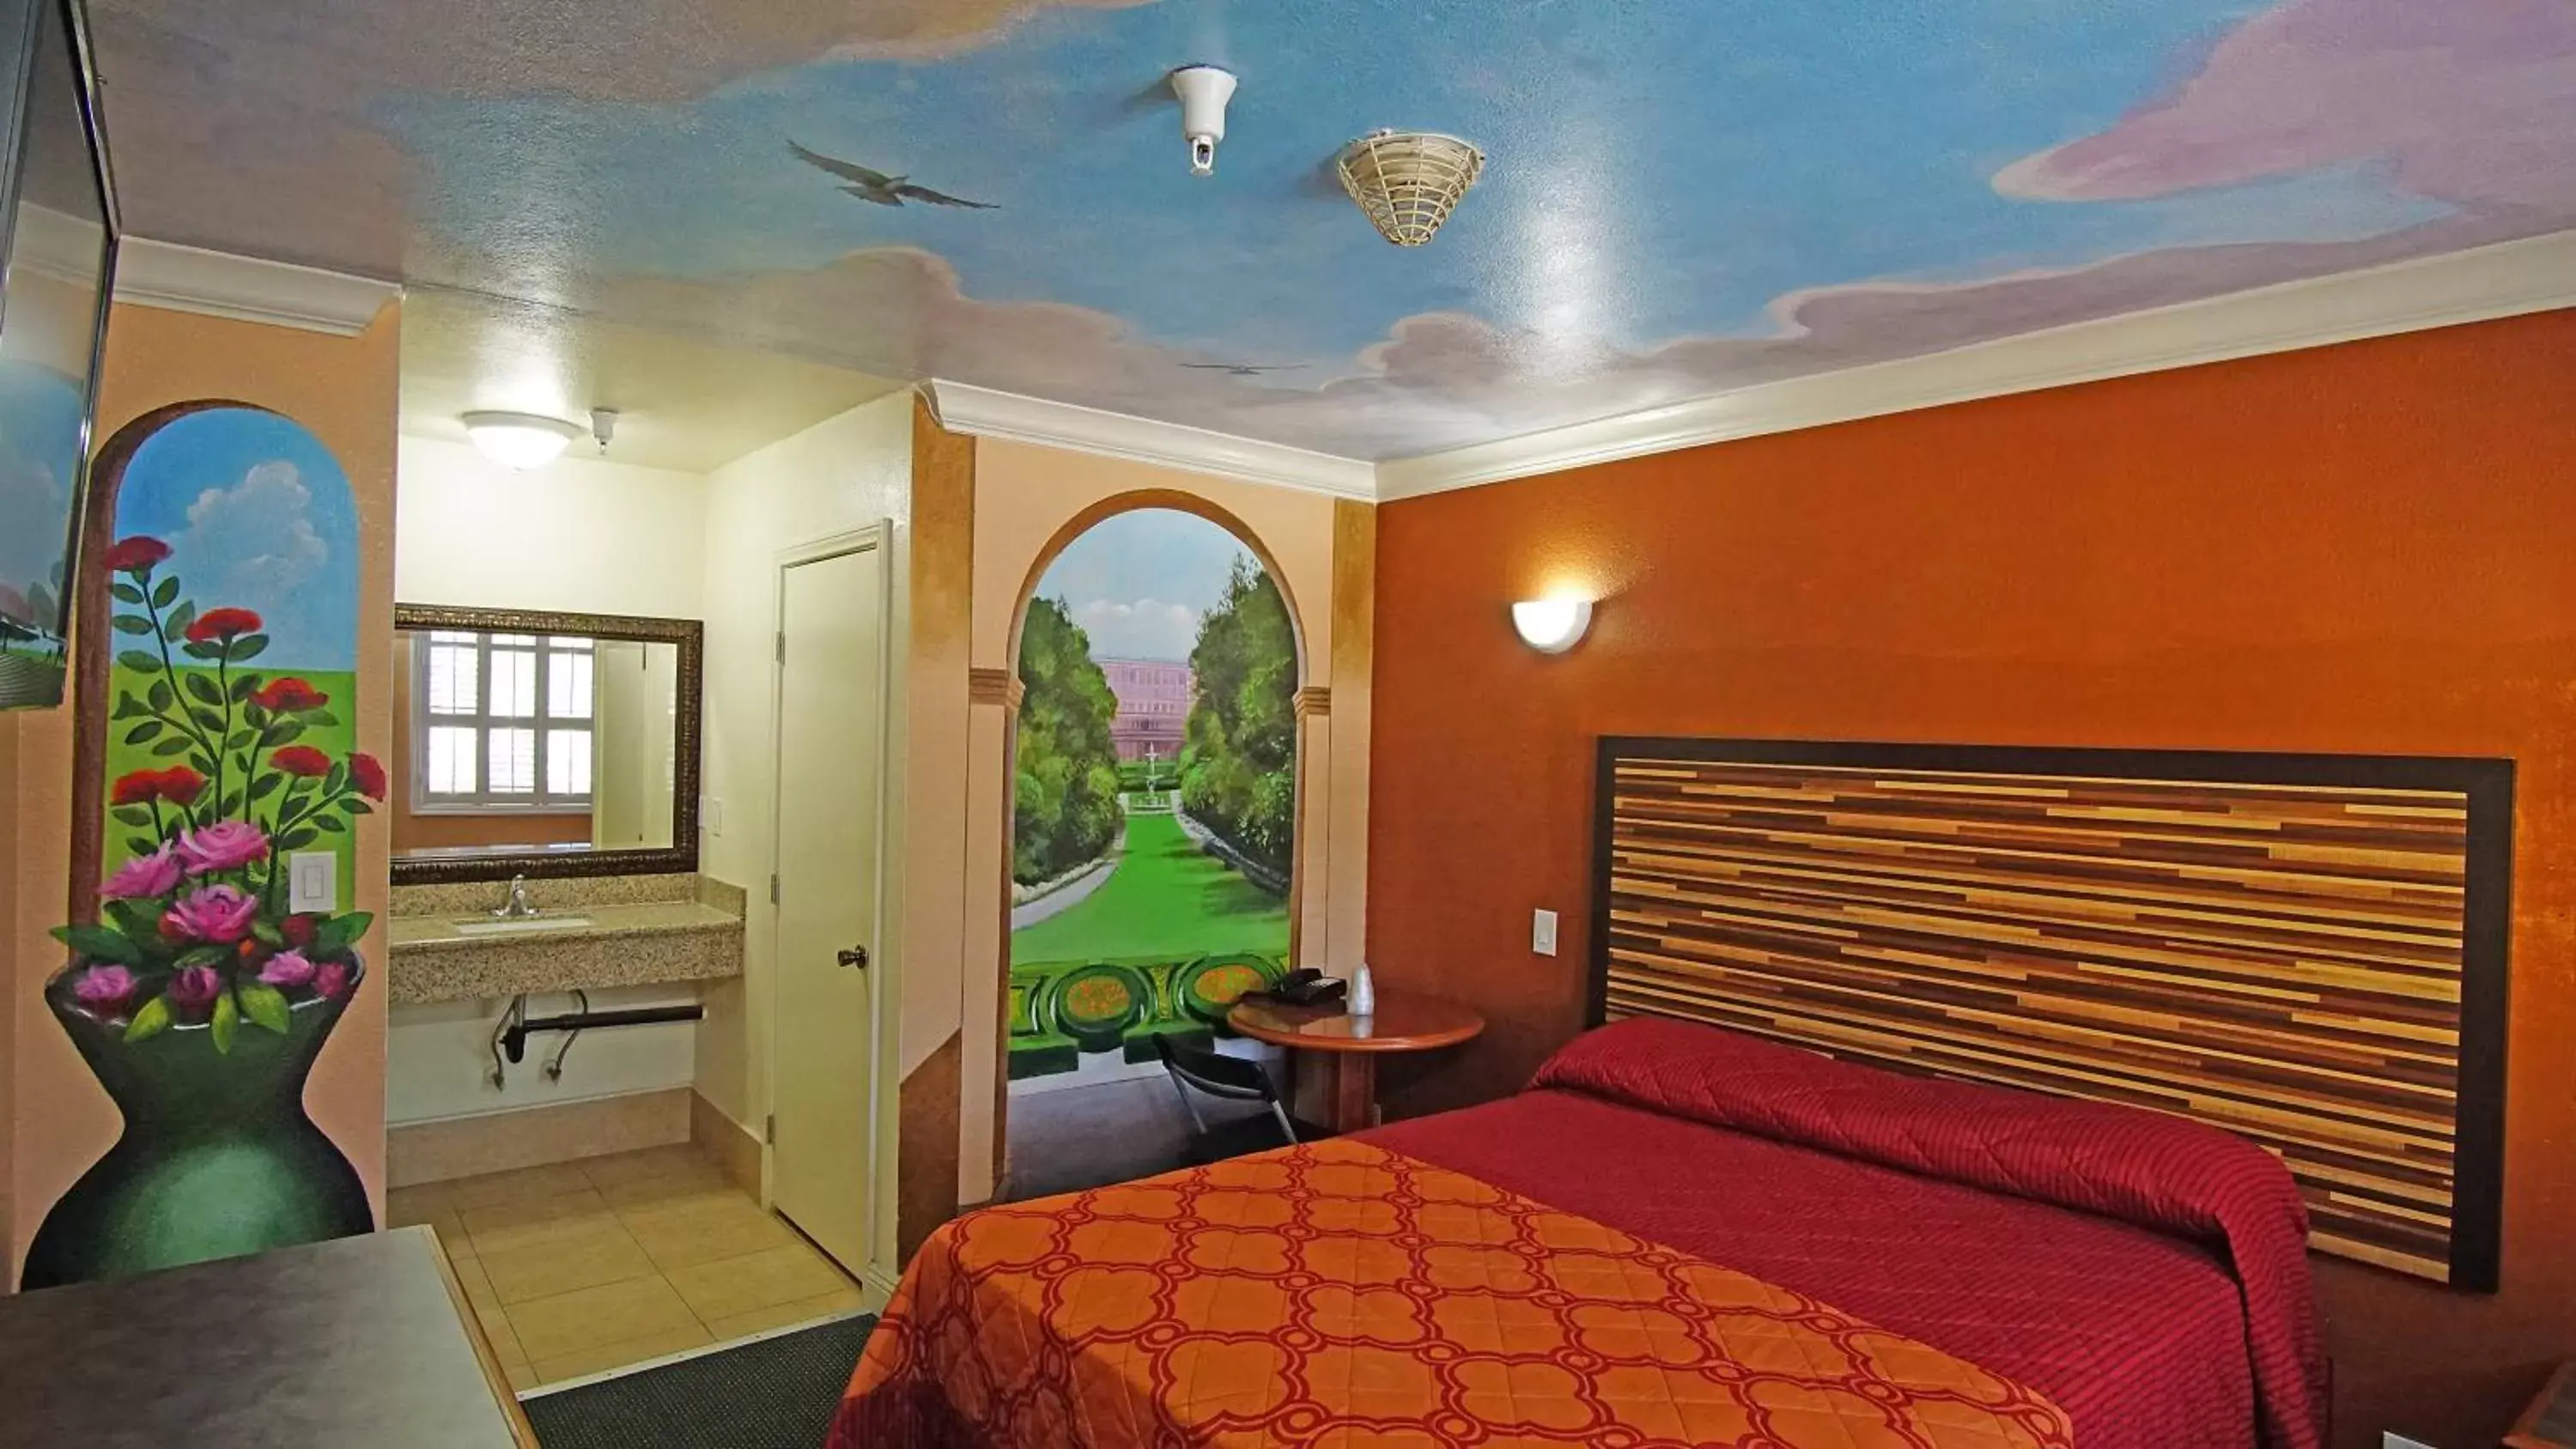 Bed in Lincoln Motel - Los Angeles, Hollywood Area